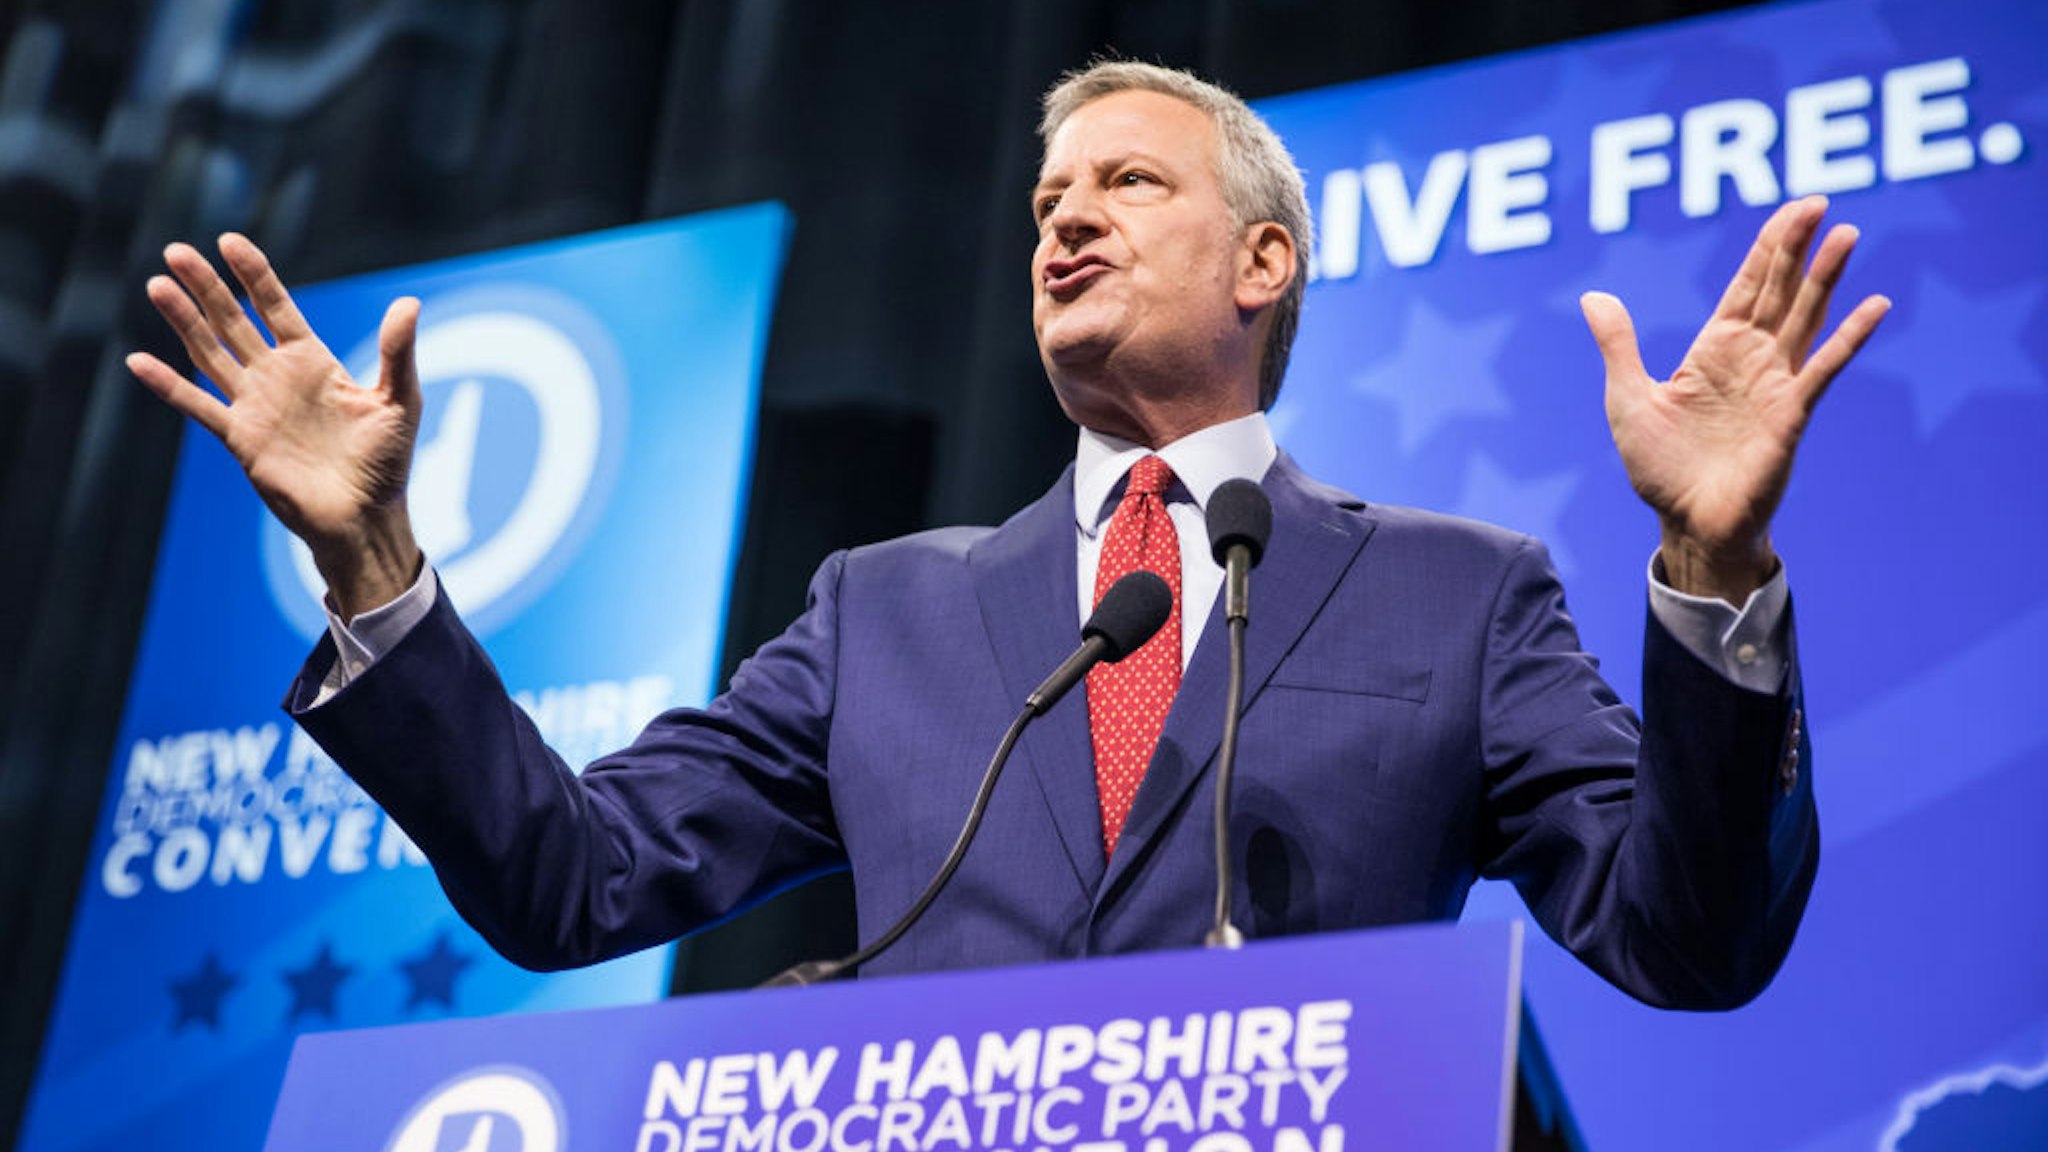 MANCHESTER, NH - SEPTEMBER 07: Democratic presidential candidate, New York City Mayor Bill de Blasio speaks during the New Hampshire Democratic Party Convention at the SNHU Arena on September 7, 2019 in Manchester, New Hampshire. Nineteen presidential candidates will be attending the New Hampshire Democratic Party convention for the state's first cattle call before the 2020 primaries.